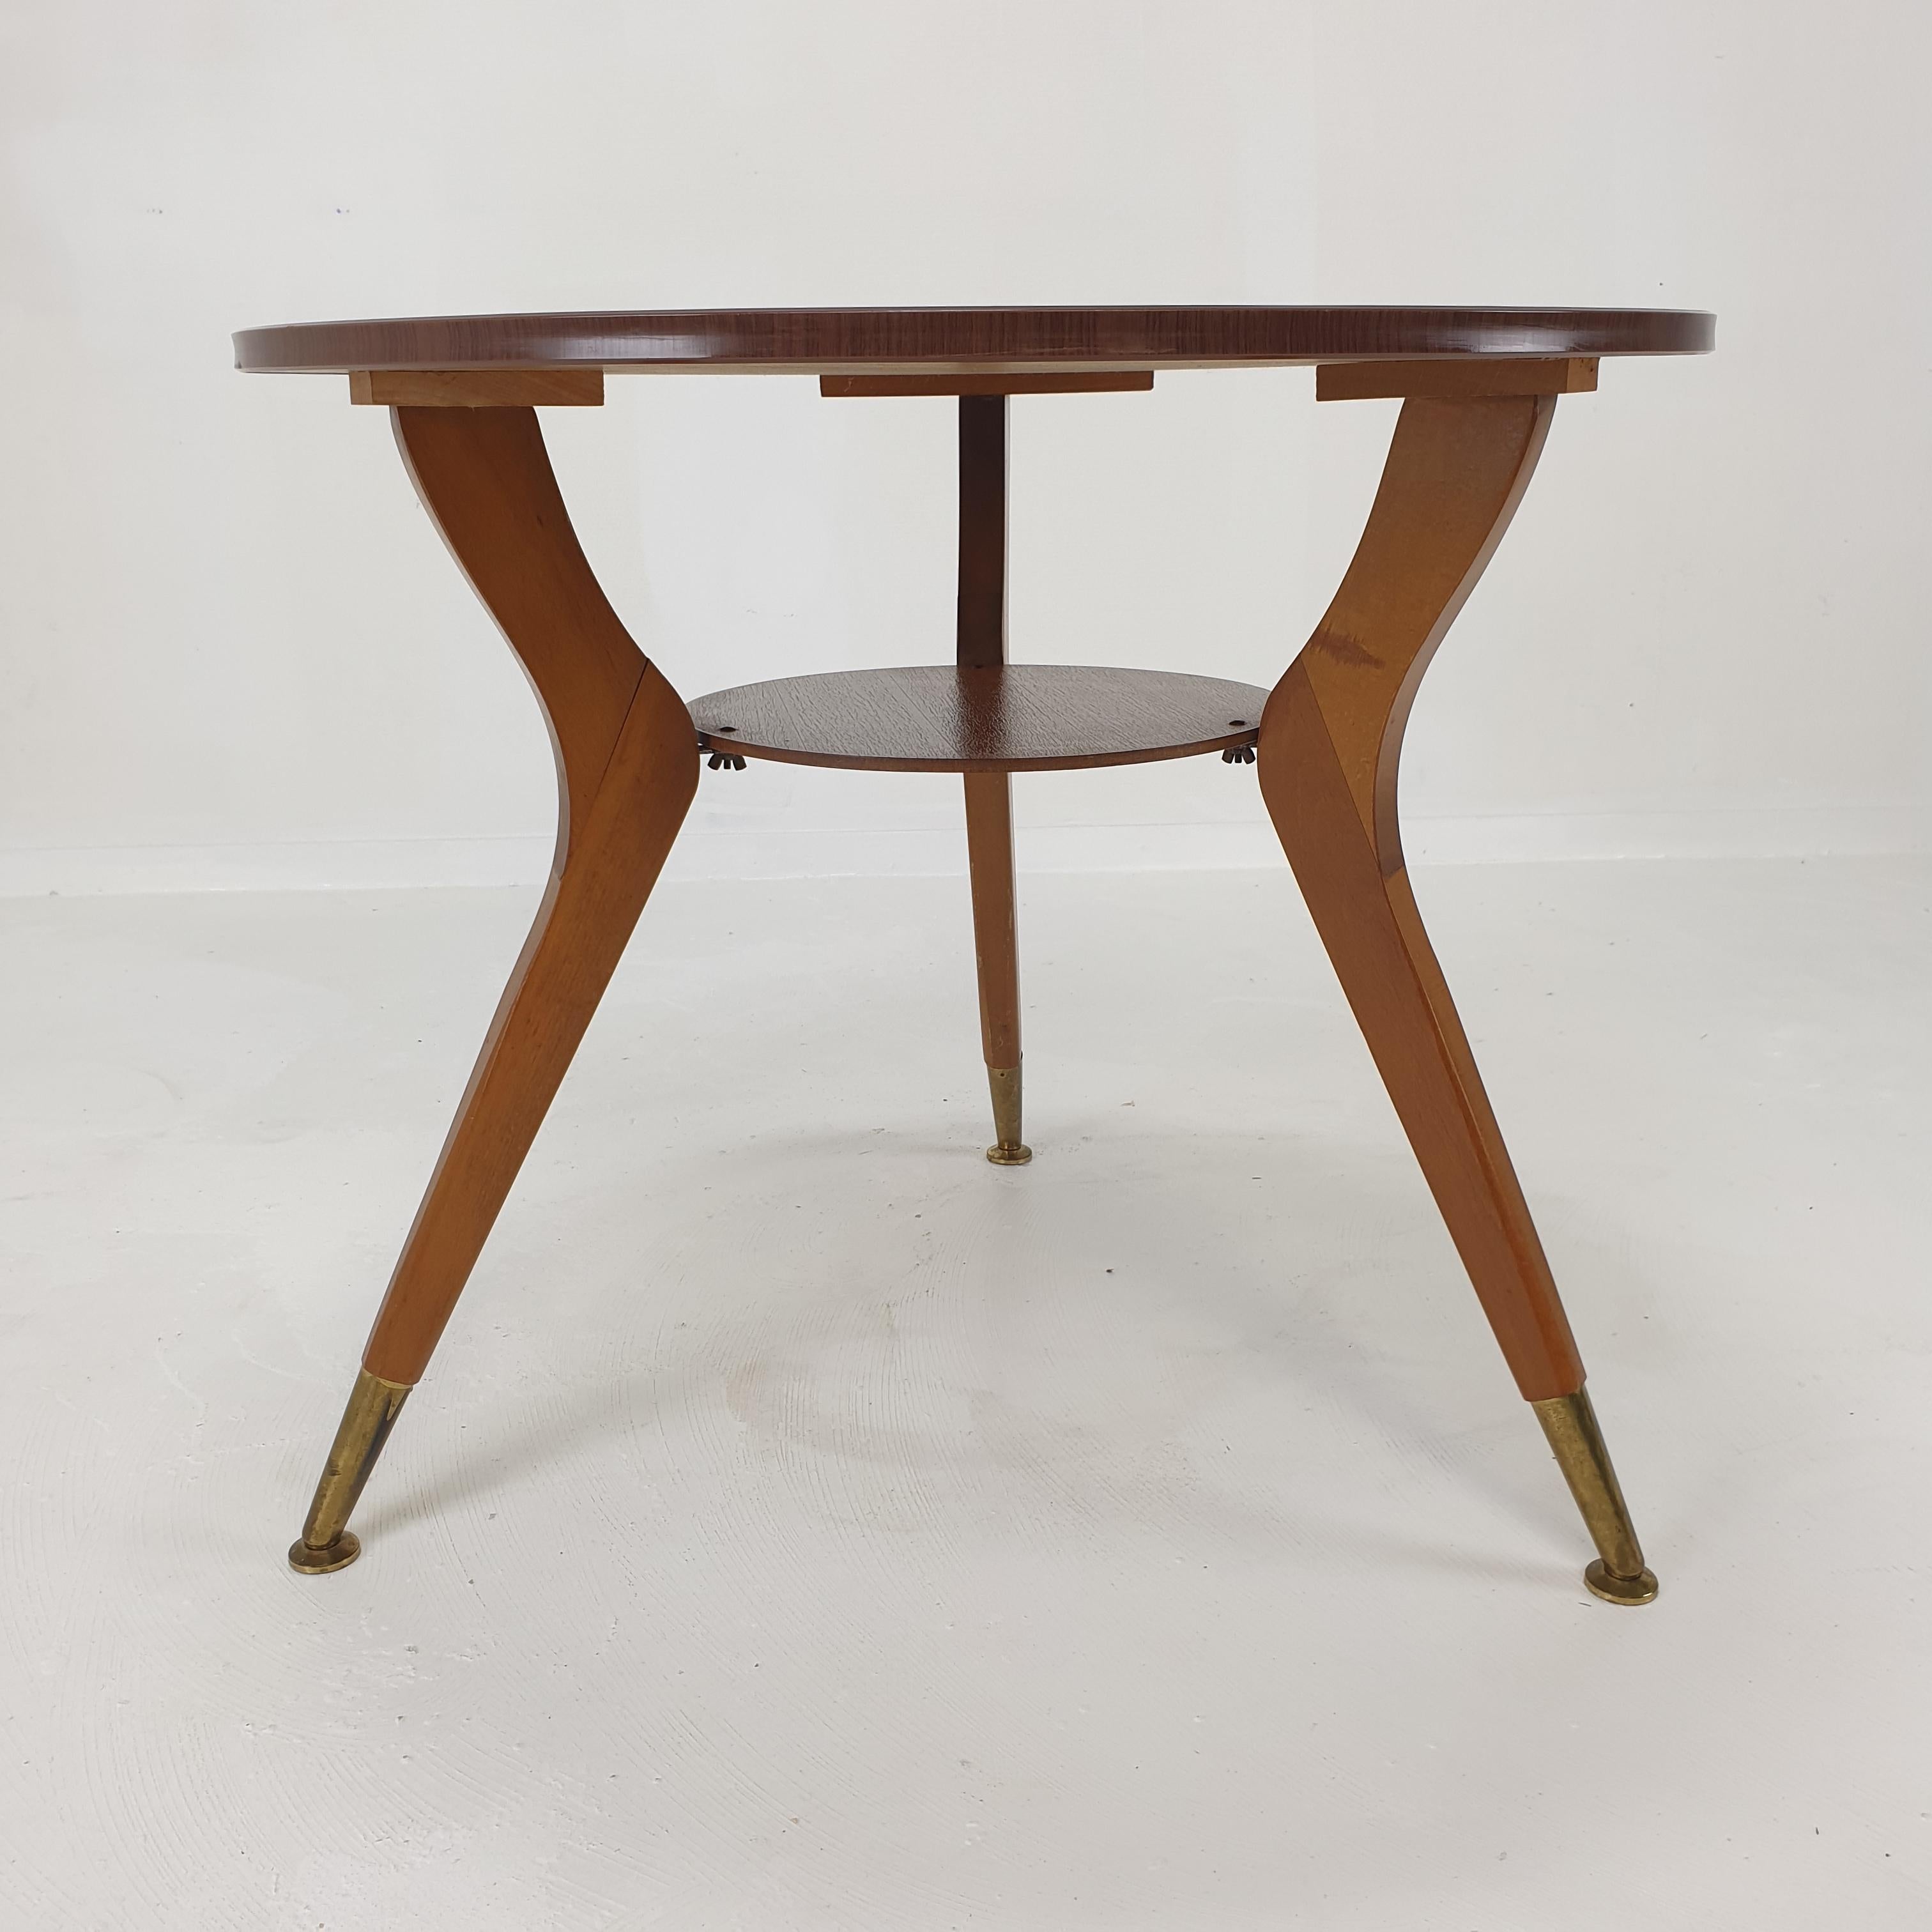 Midcentury Italian Wooden Coffee or Side Table with Brass Feet, 1960s For Sale 11